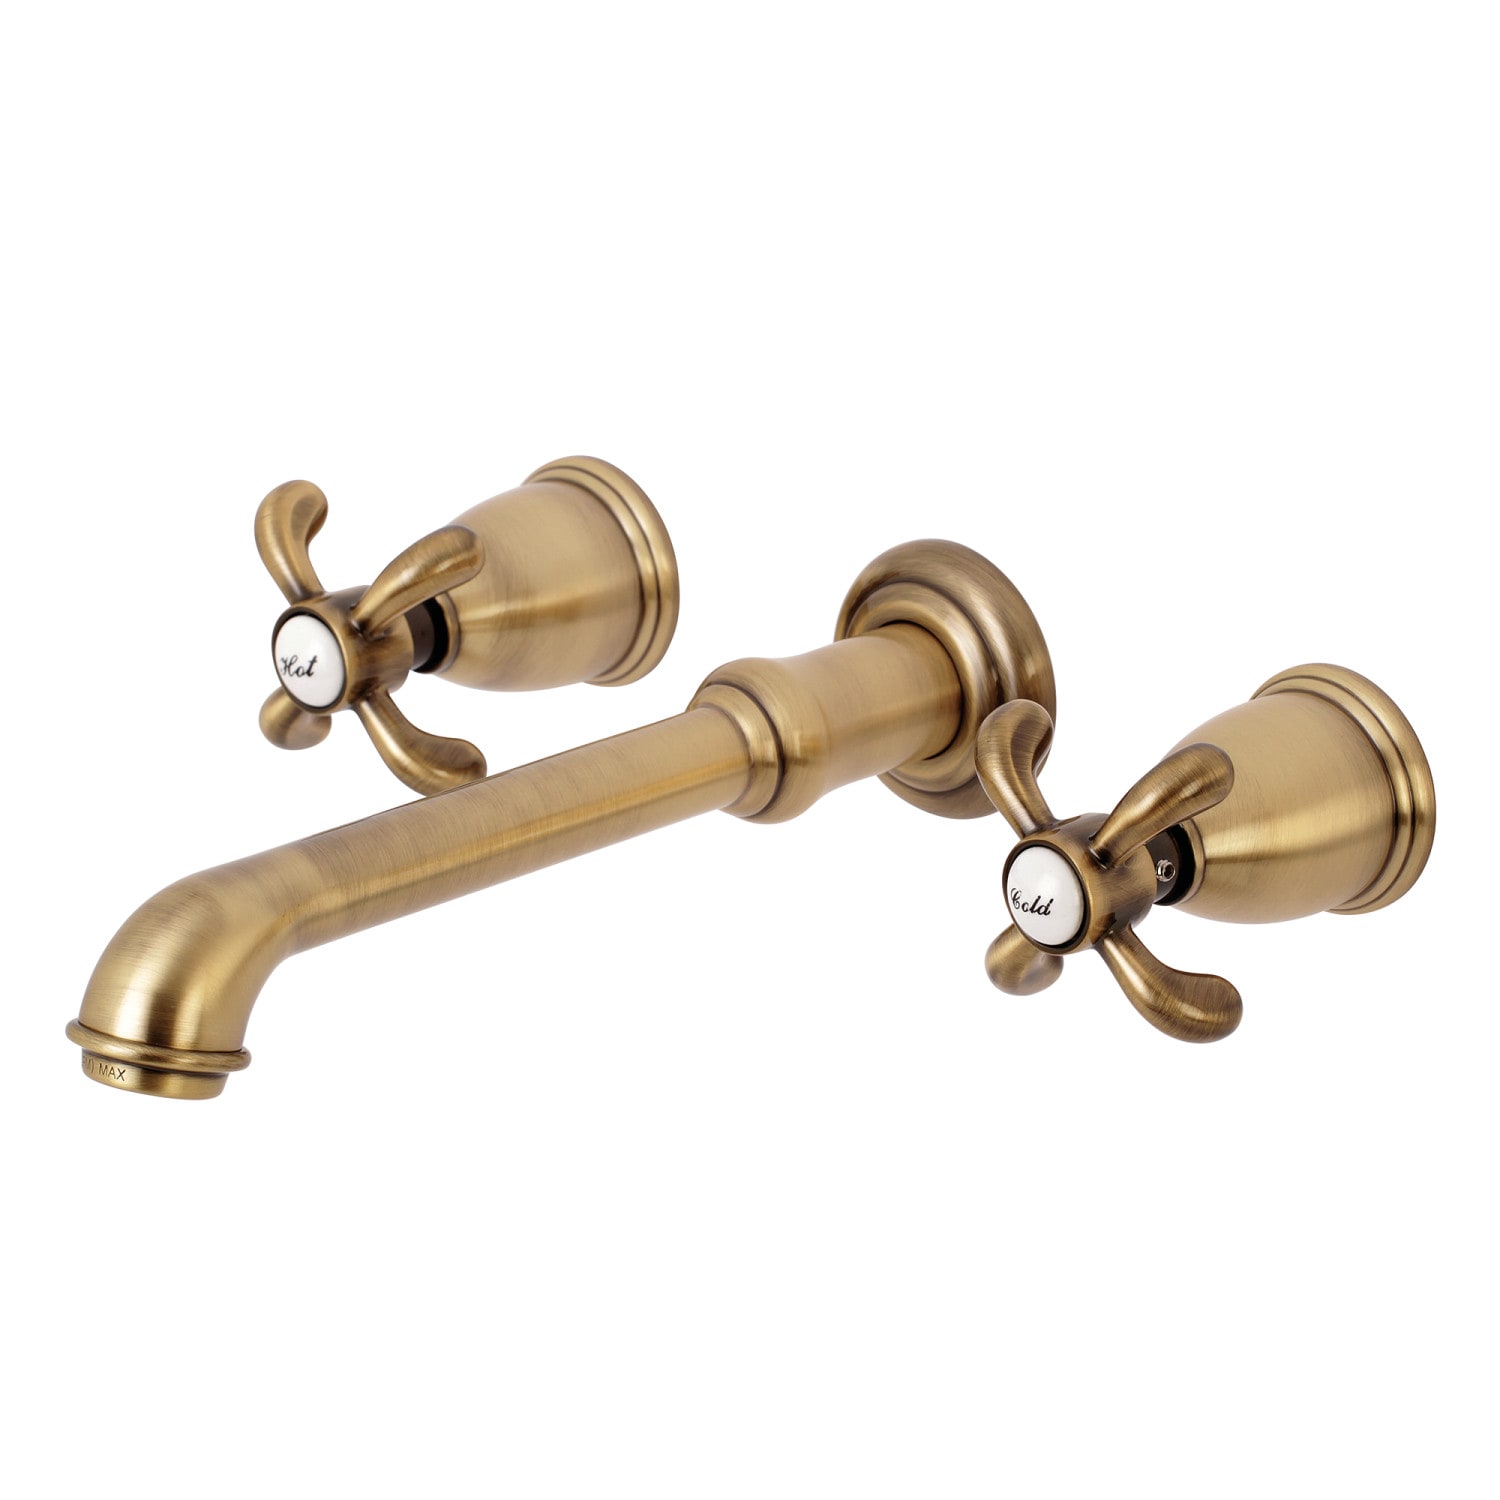 Kingston Brass French Country Antique Brass Wall-Mount 2-Handle Bathroom Sink Faucet | WLKS7123TX